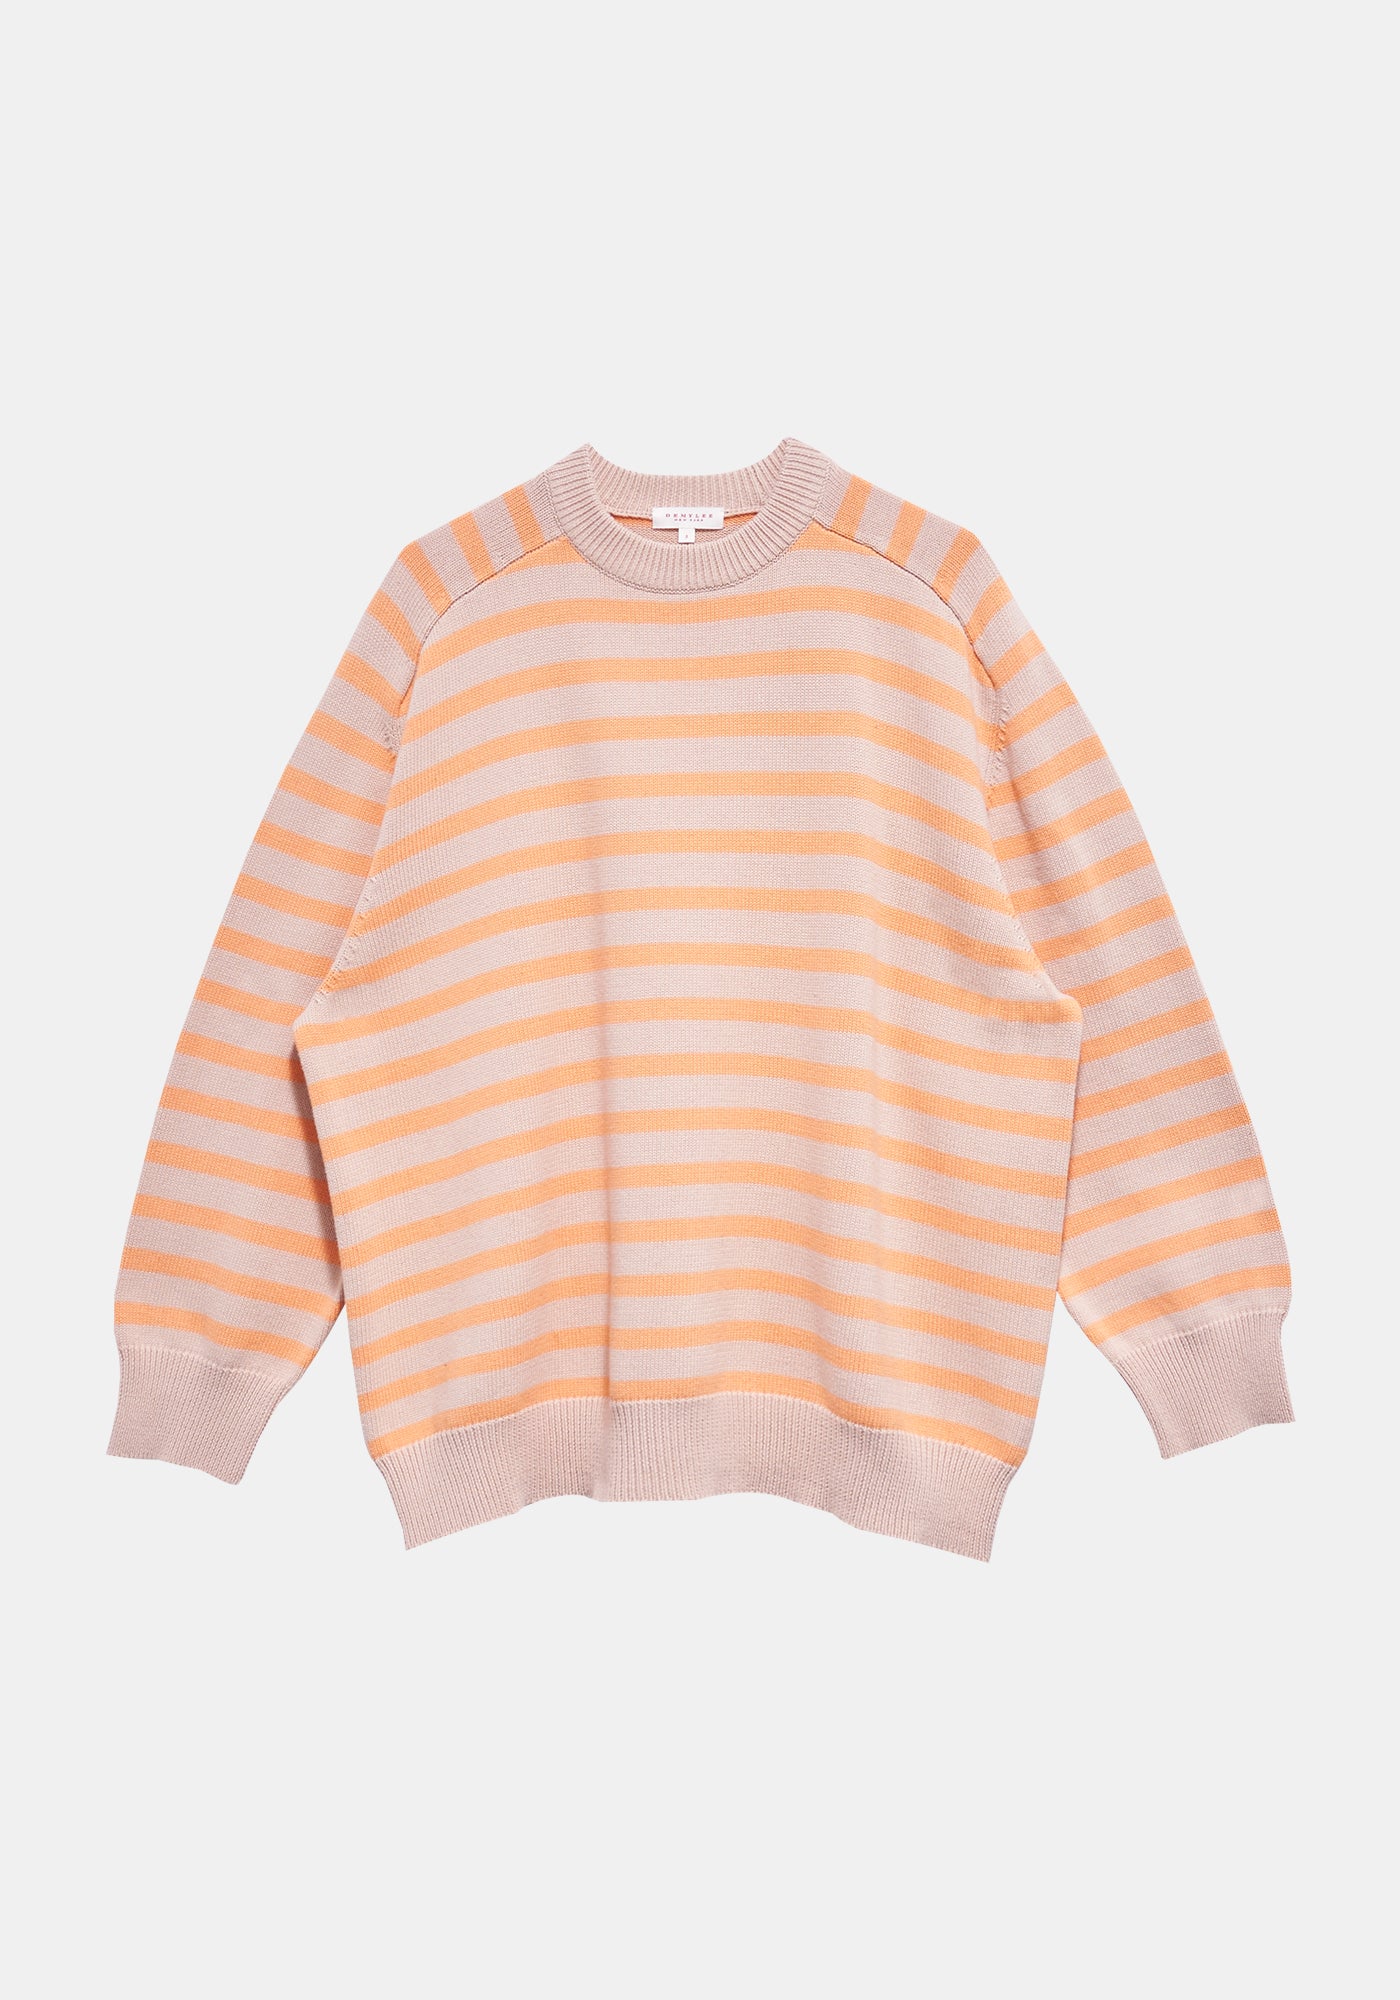 DEMYLEE NEW YORK _ CRESSIDA STRIPED COTTON SWEATER _ Oversized Crewneck Fit with Peach on Tan Stripes and Ribbed Hem Finishes